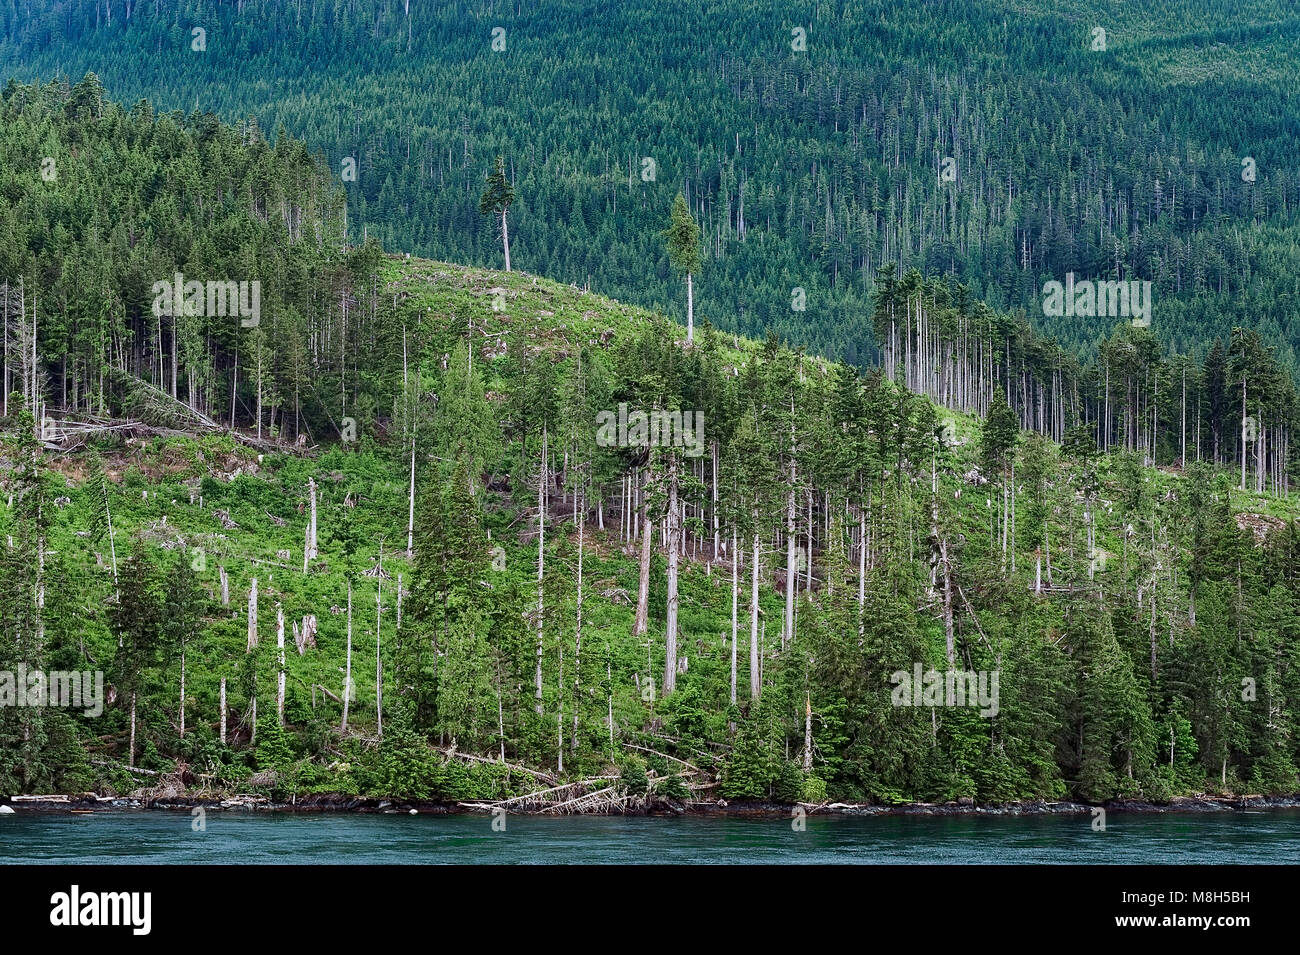 Clearcutting and replanting along the Campell River, British Columbia, Canada Stock Photo